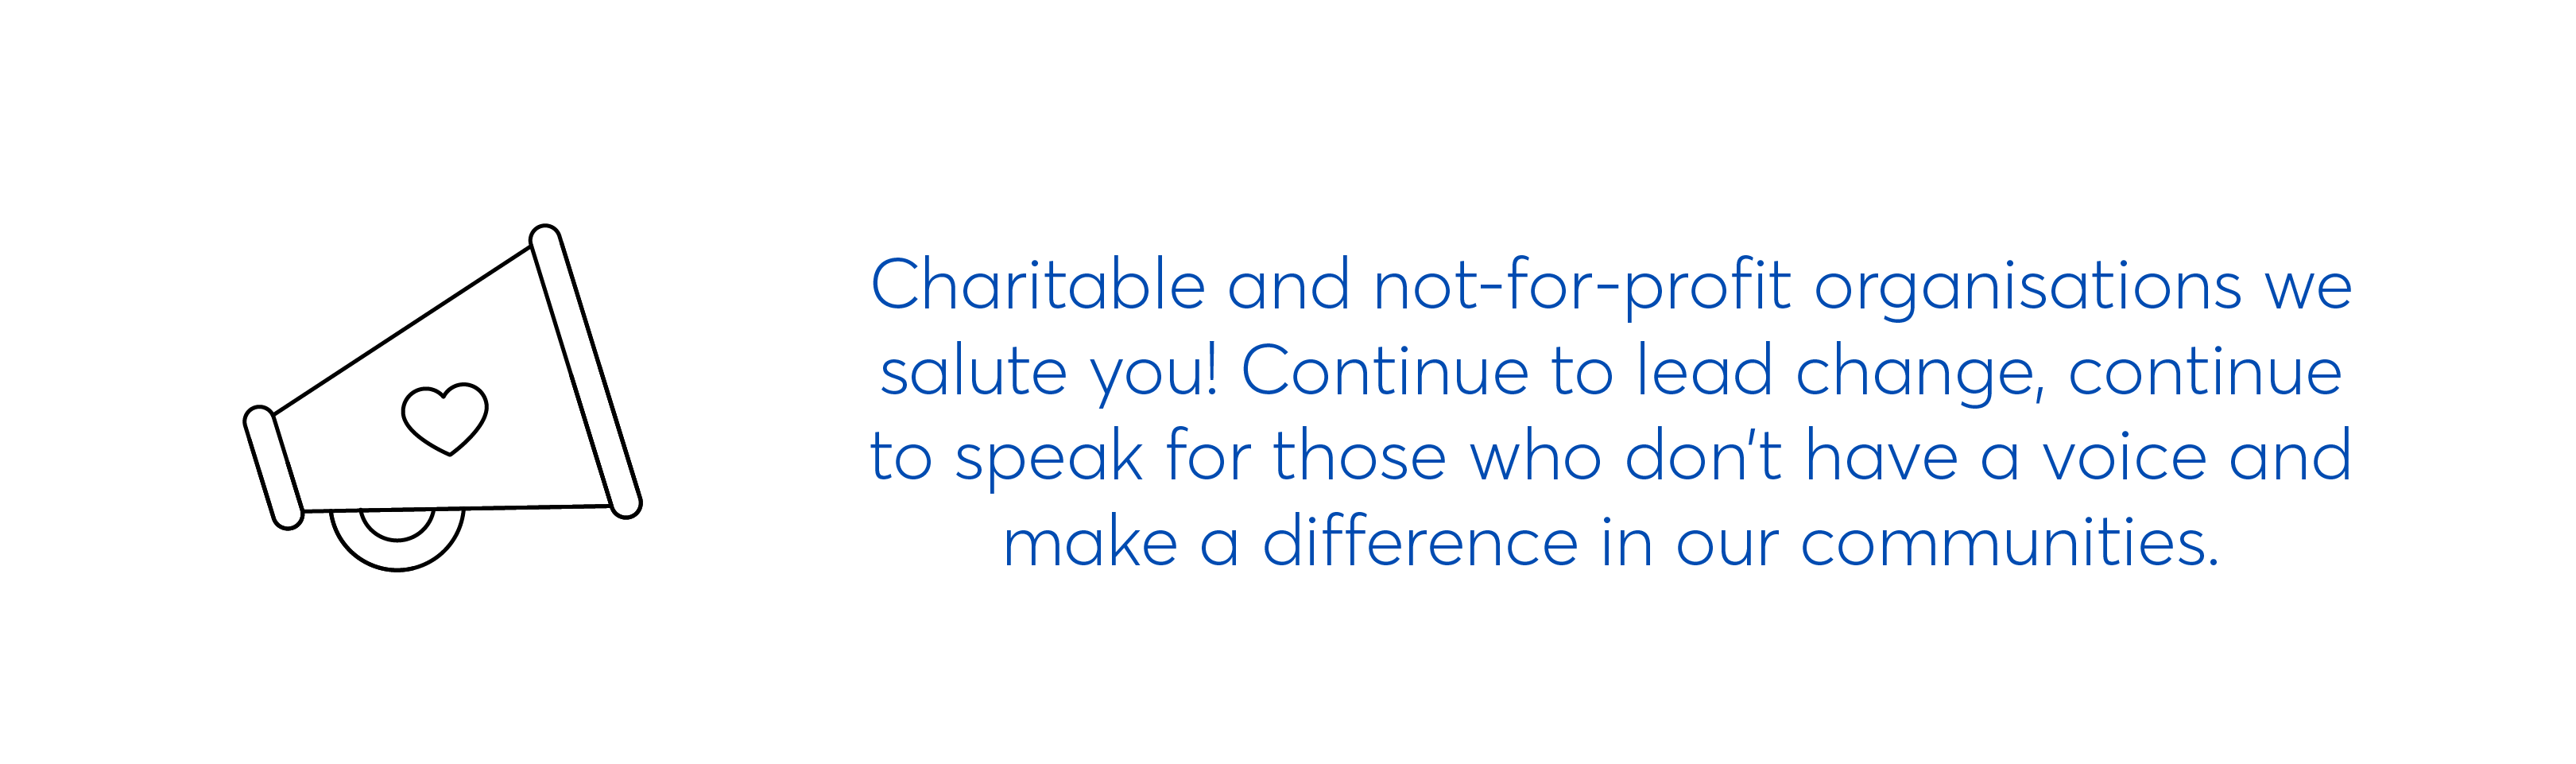 A salute to charities and Not-for-profits